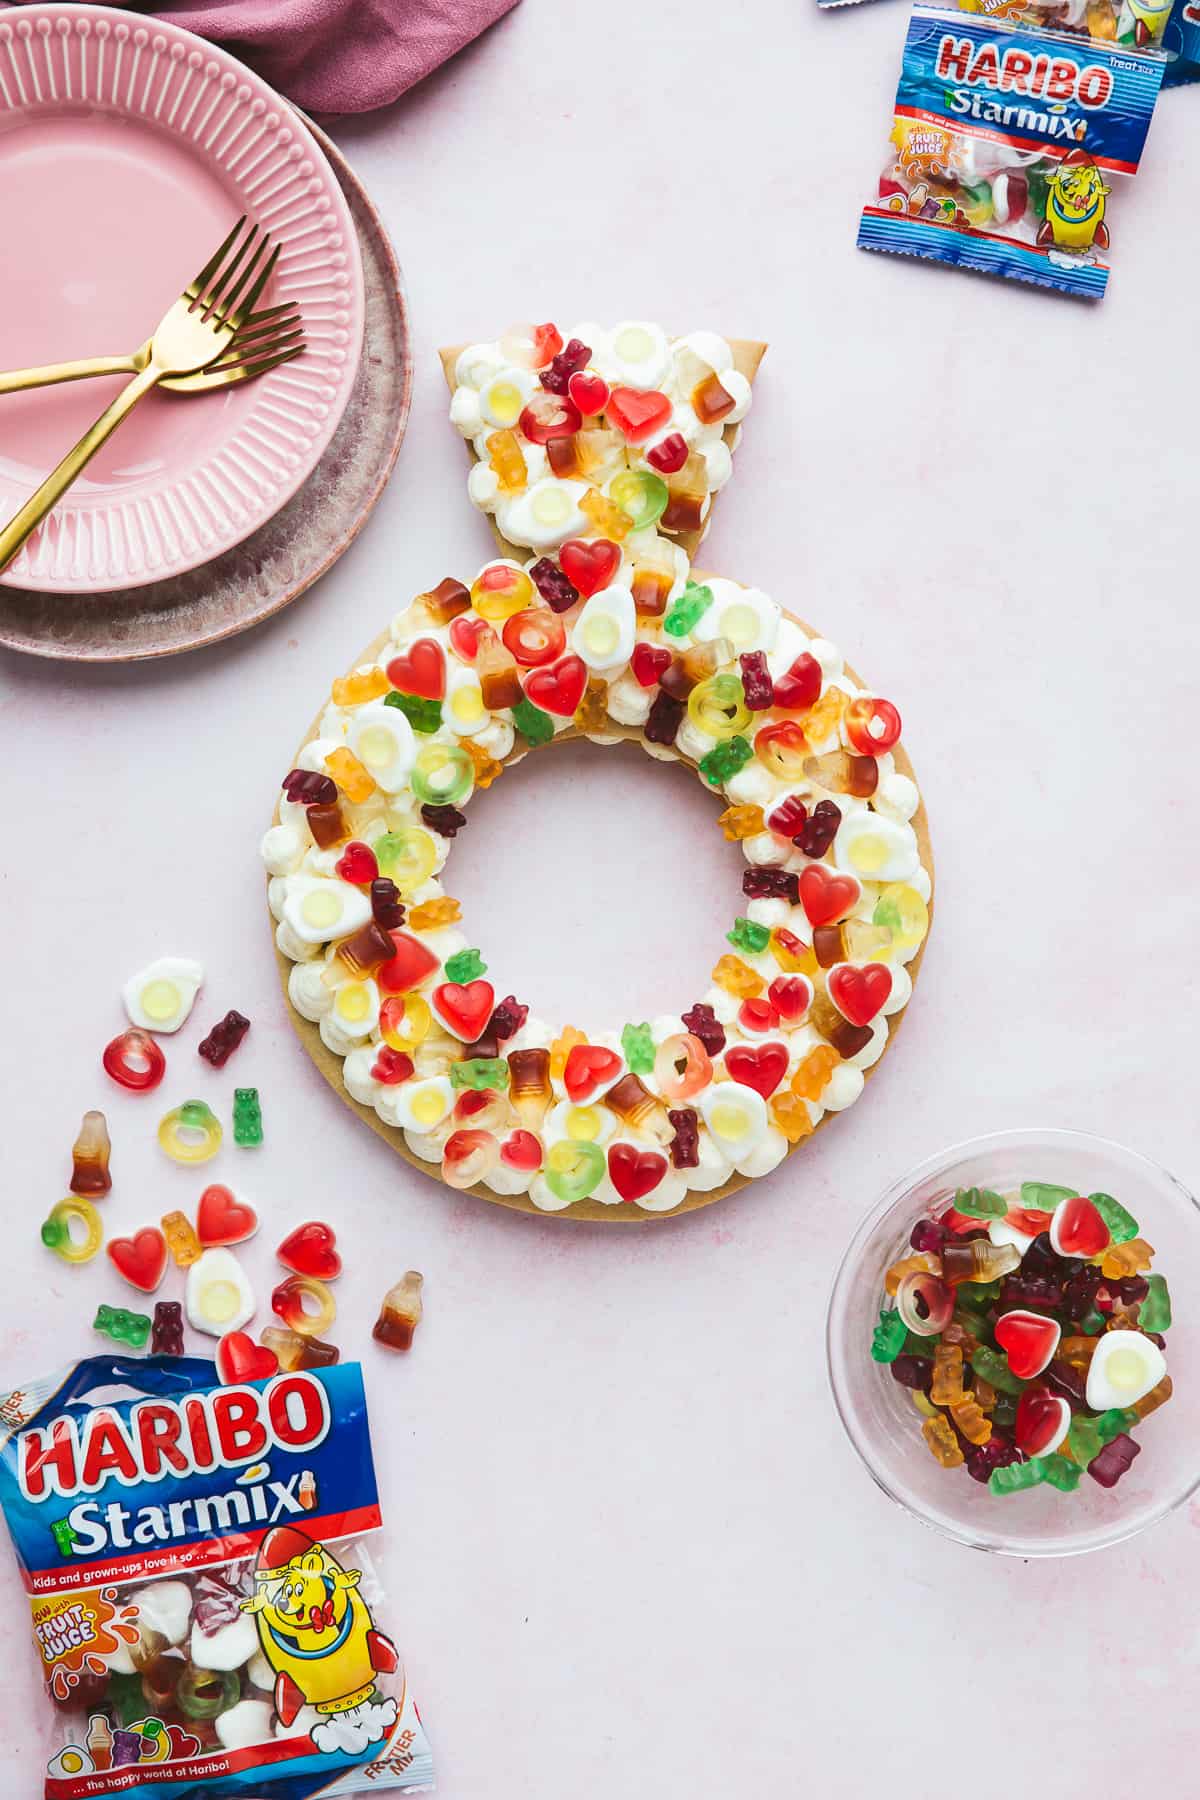 A cream tart in a ring shape filled with vanilla buttercream and decorated with HARIBO sweets. 